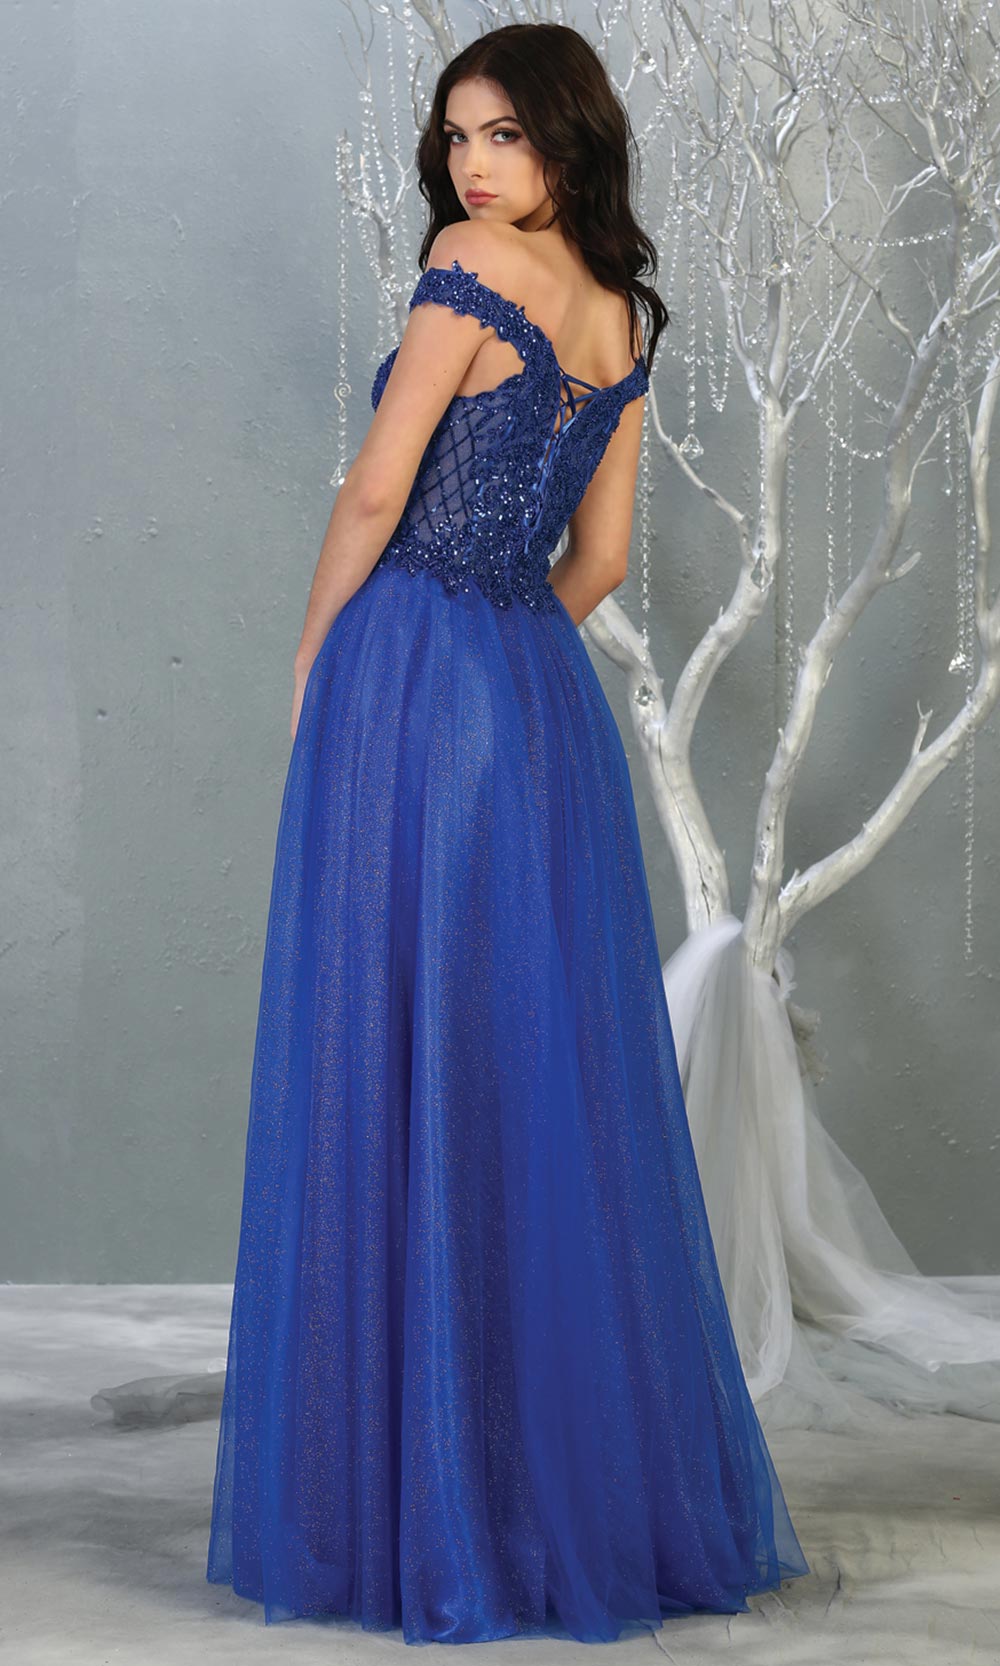 Mayqueen RQ7864 long royal blue off shoulder sequin top evening gown. Full length flowy dress w/ tulle skirt is perfect for  enagagement/e-shoot dress,sweet 16, debut, formal evening party dress, prom, engagement, wedding reception. Plus sizes avail-b.jpg